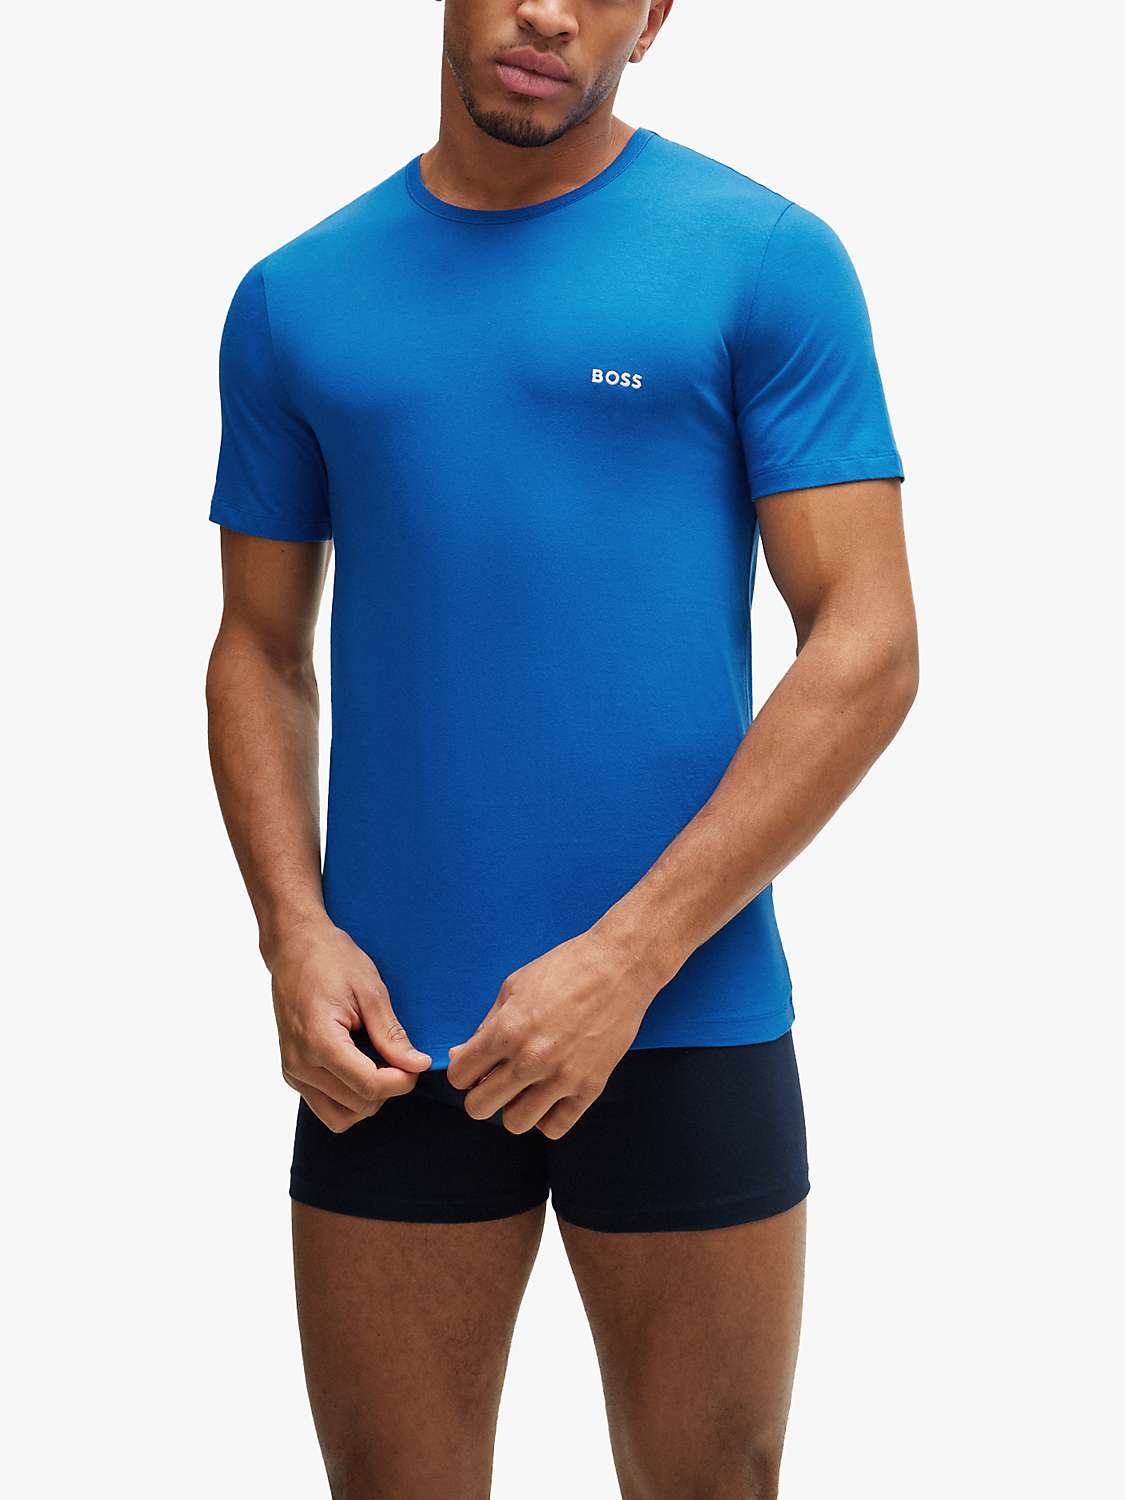 Buy BOSS Essential Style Classic Bodywear T-Shirt, Pack of 3 Online at johnlewis.com